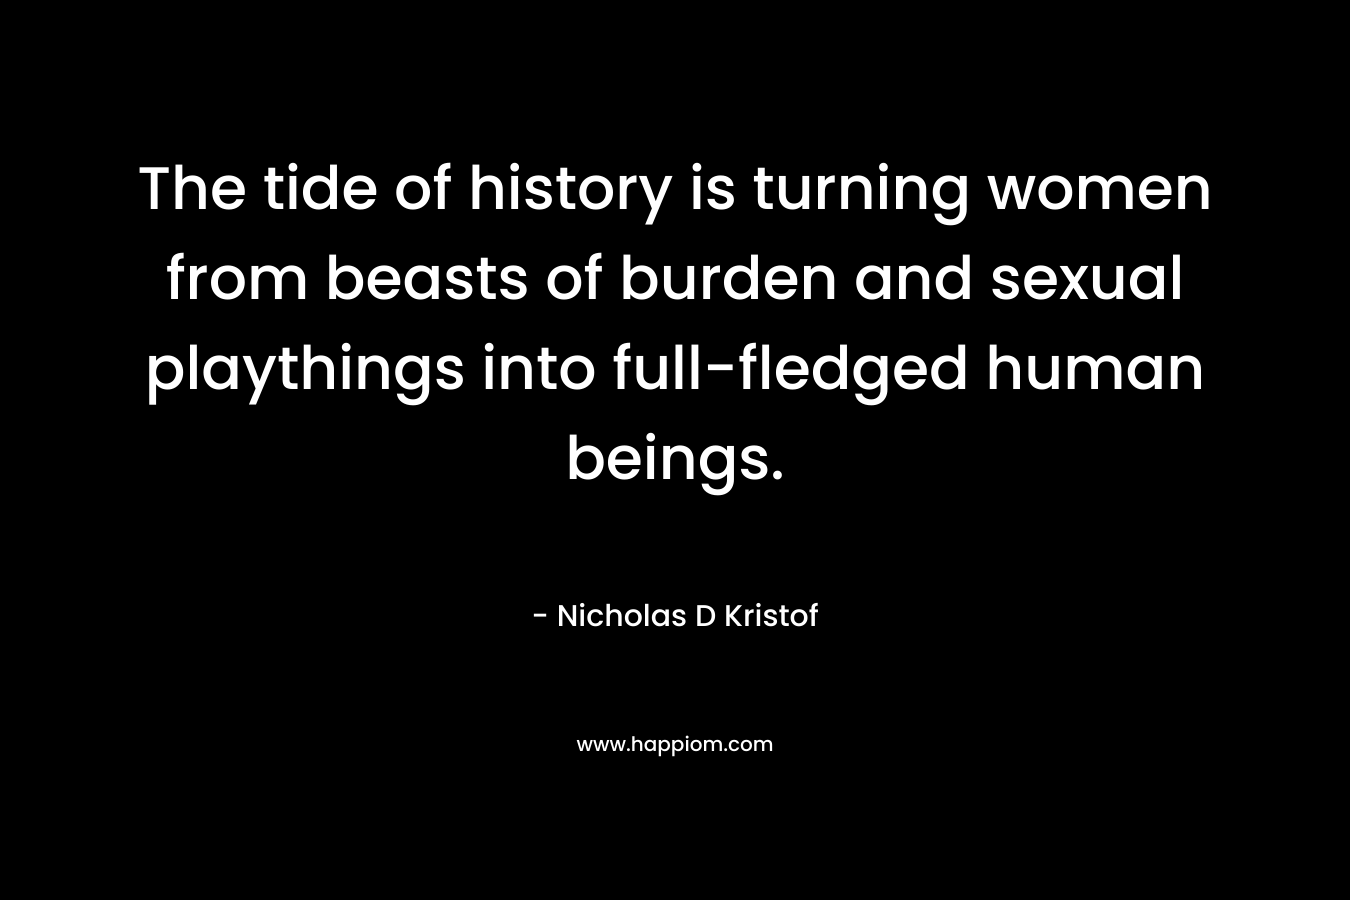 The tide of history is turning women from beasts of burden and sexual playthings into full-fledged human beings.